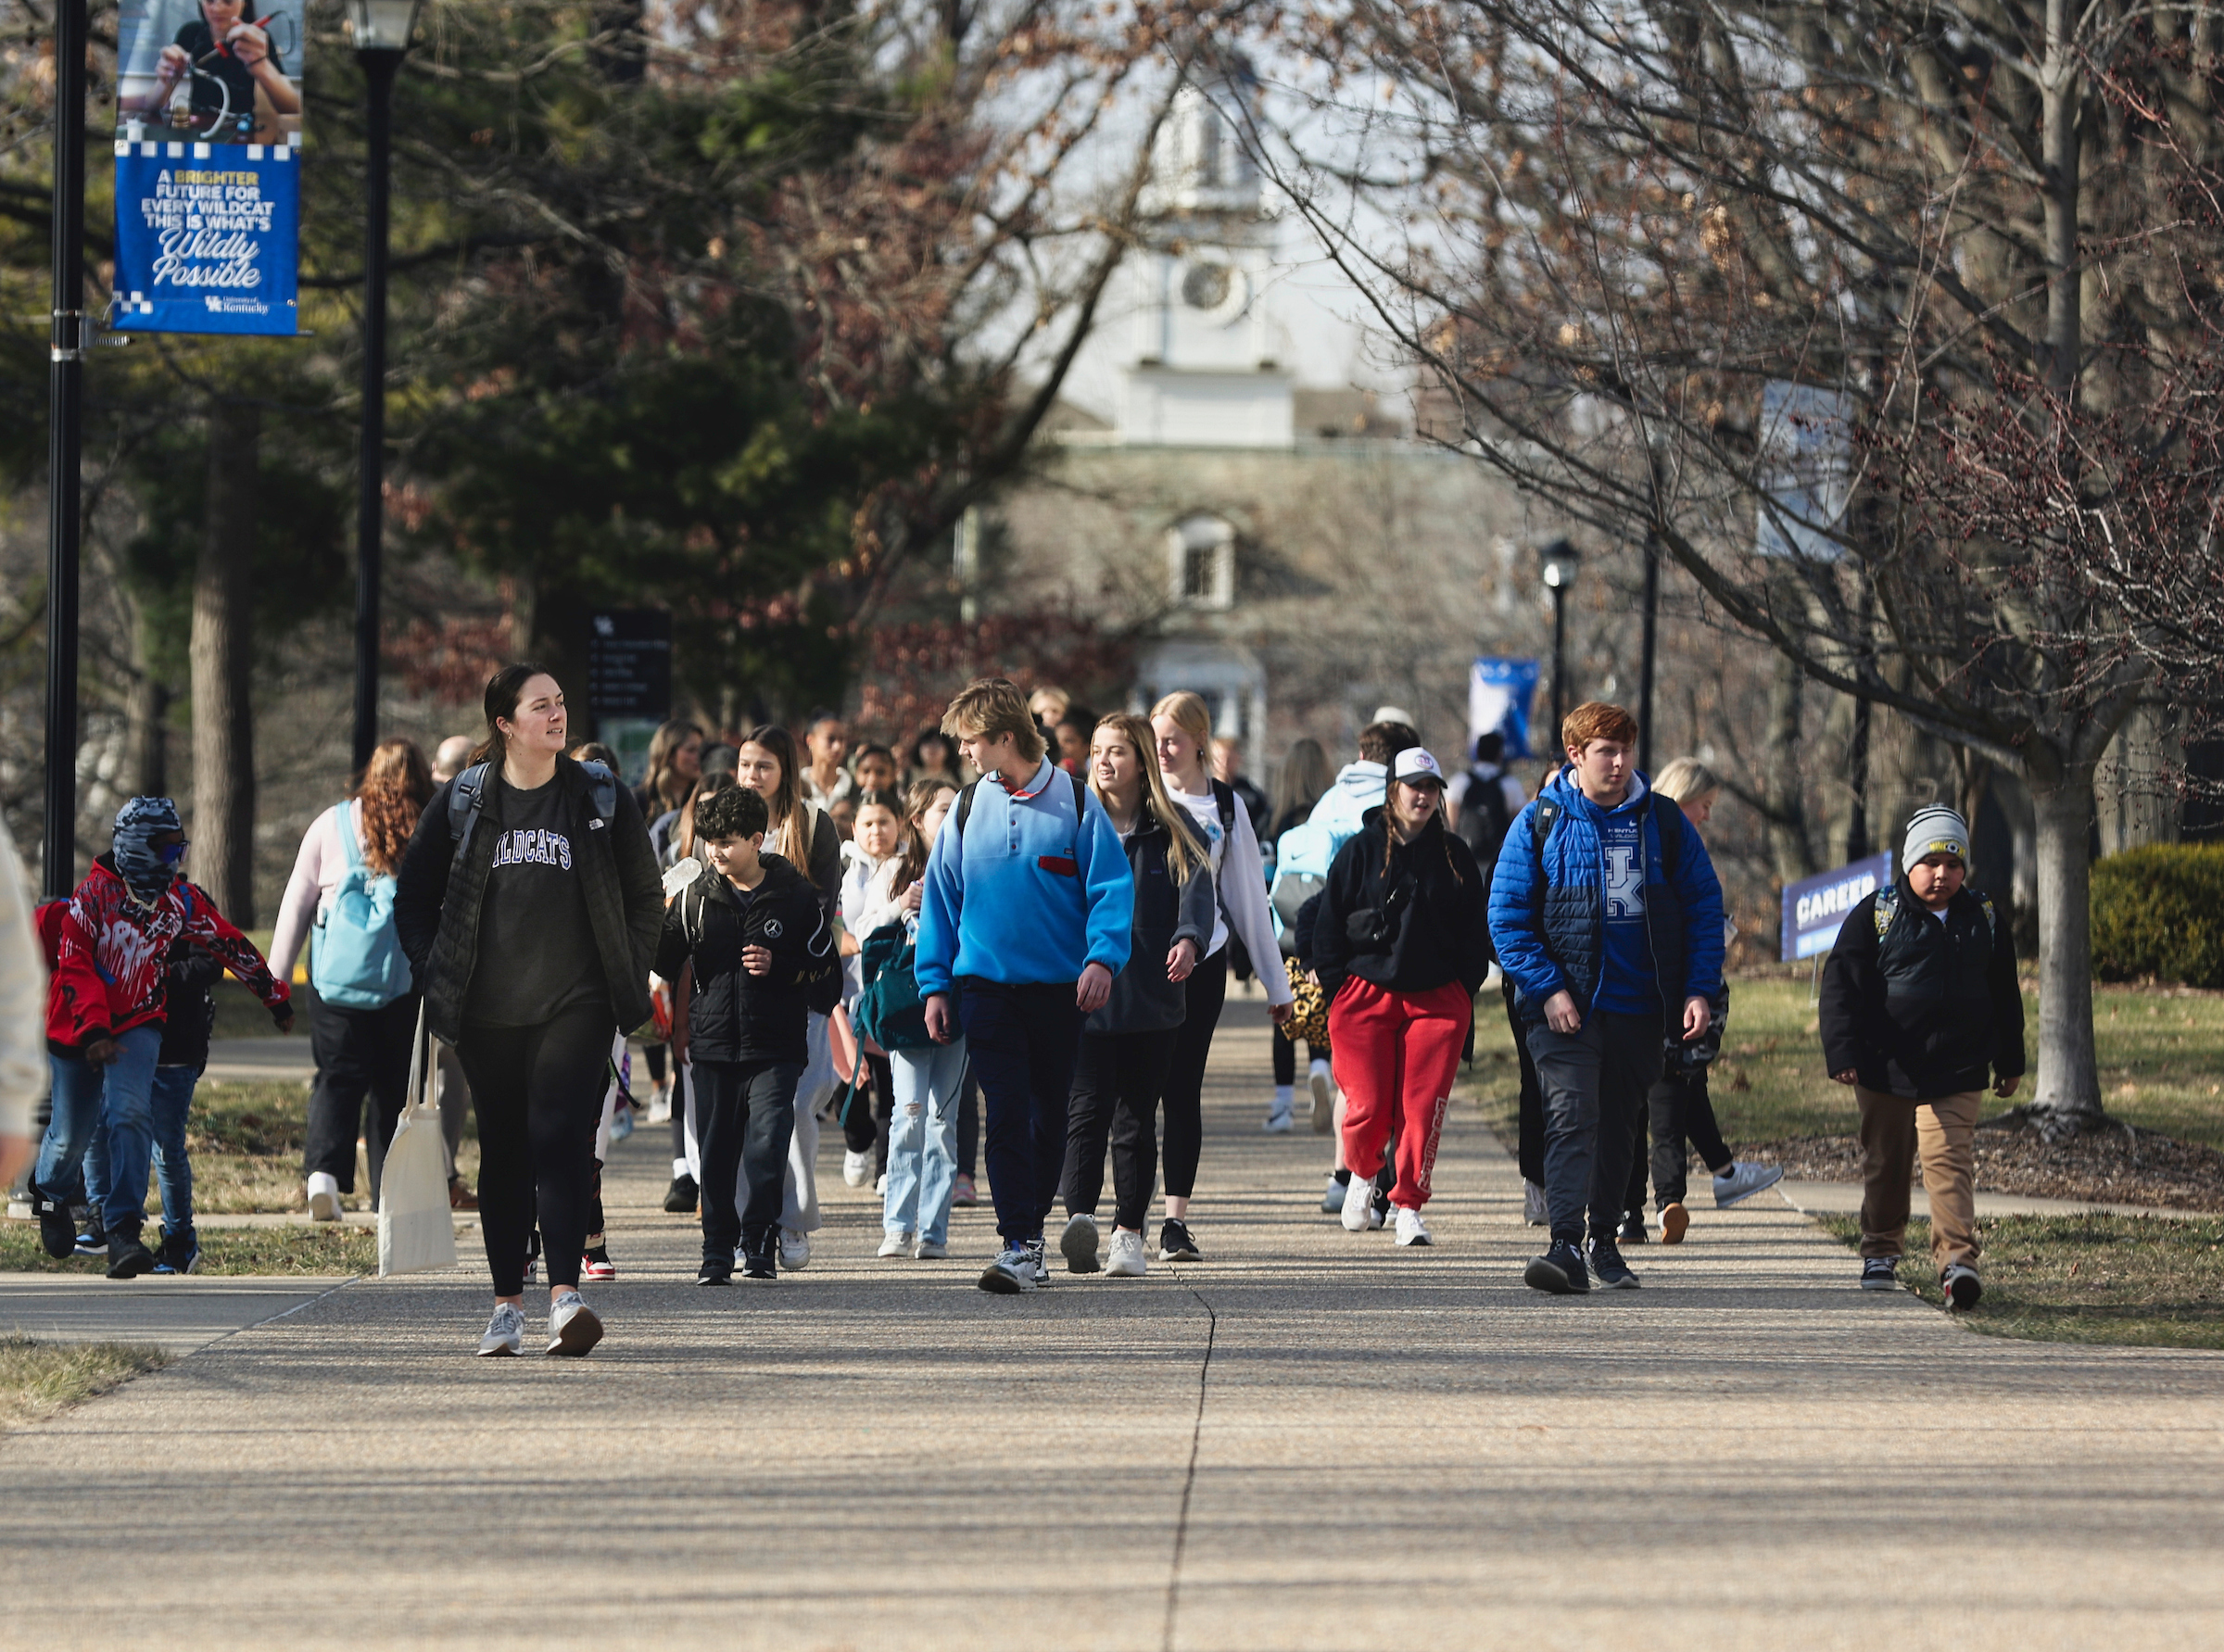 This is a photo of students on the University of Kentucky campus.